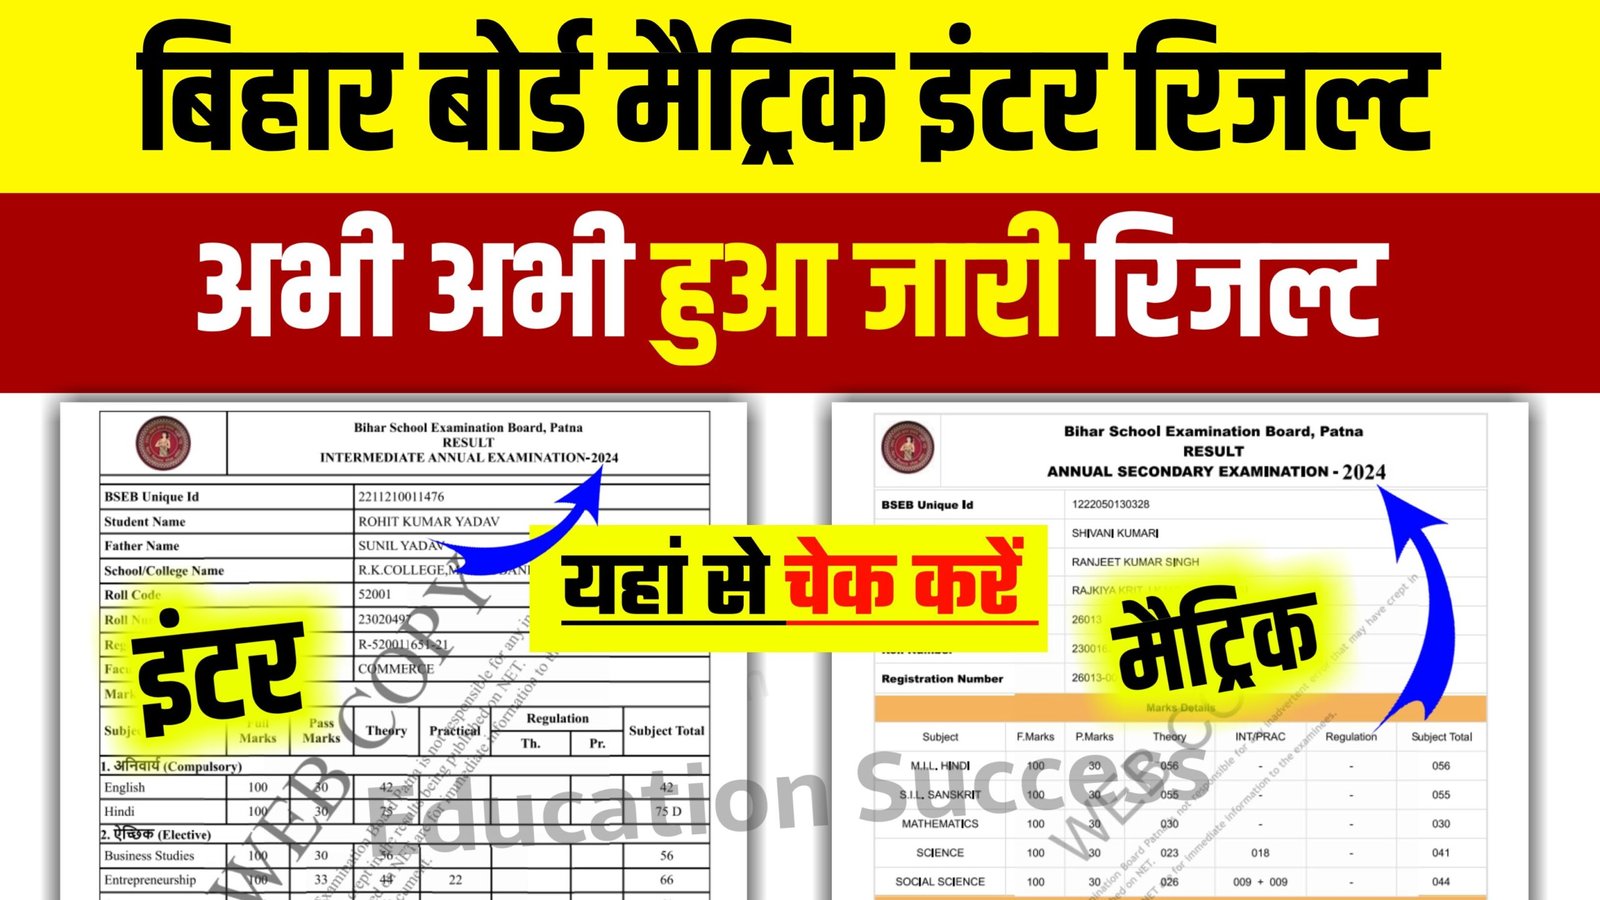 Bihar Board Matric Inter Result Out Download Now: